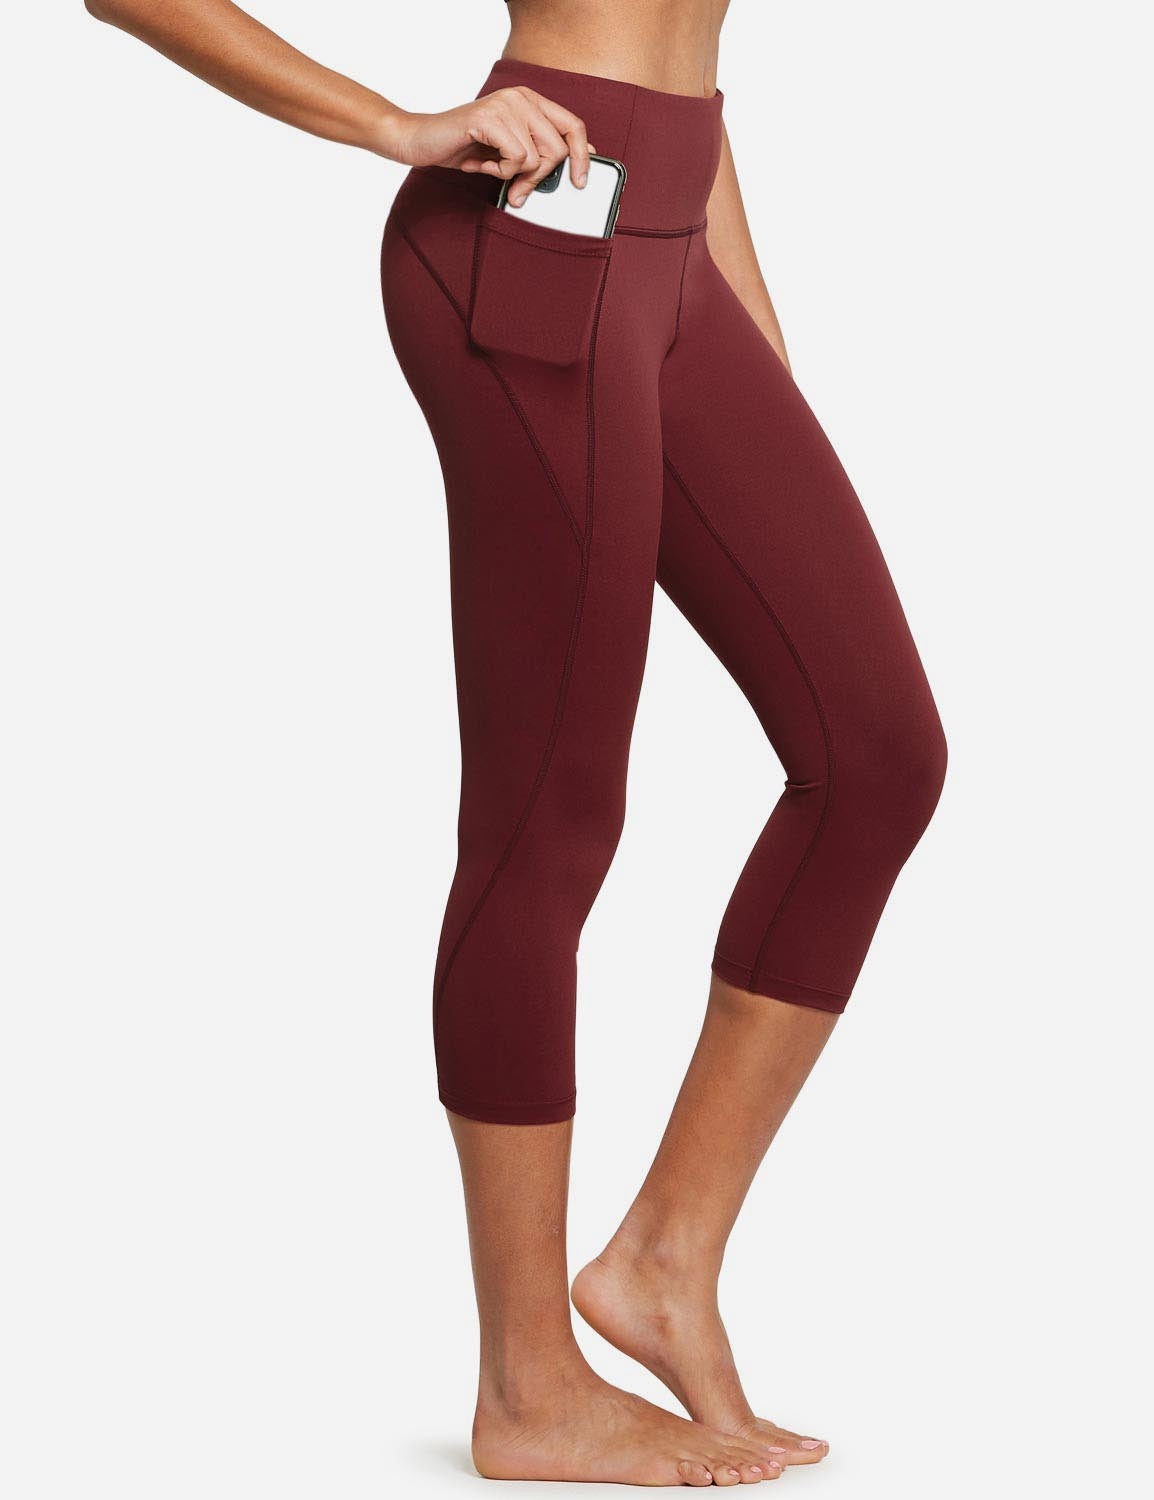 Baleaf Women's High Rise Bottom Contour Pocketed Capris abh168 Wine Red Side